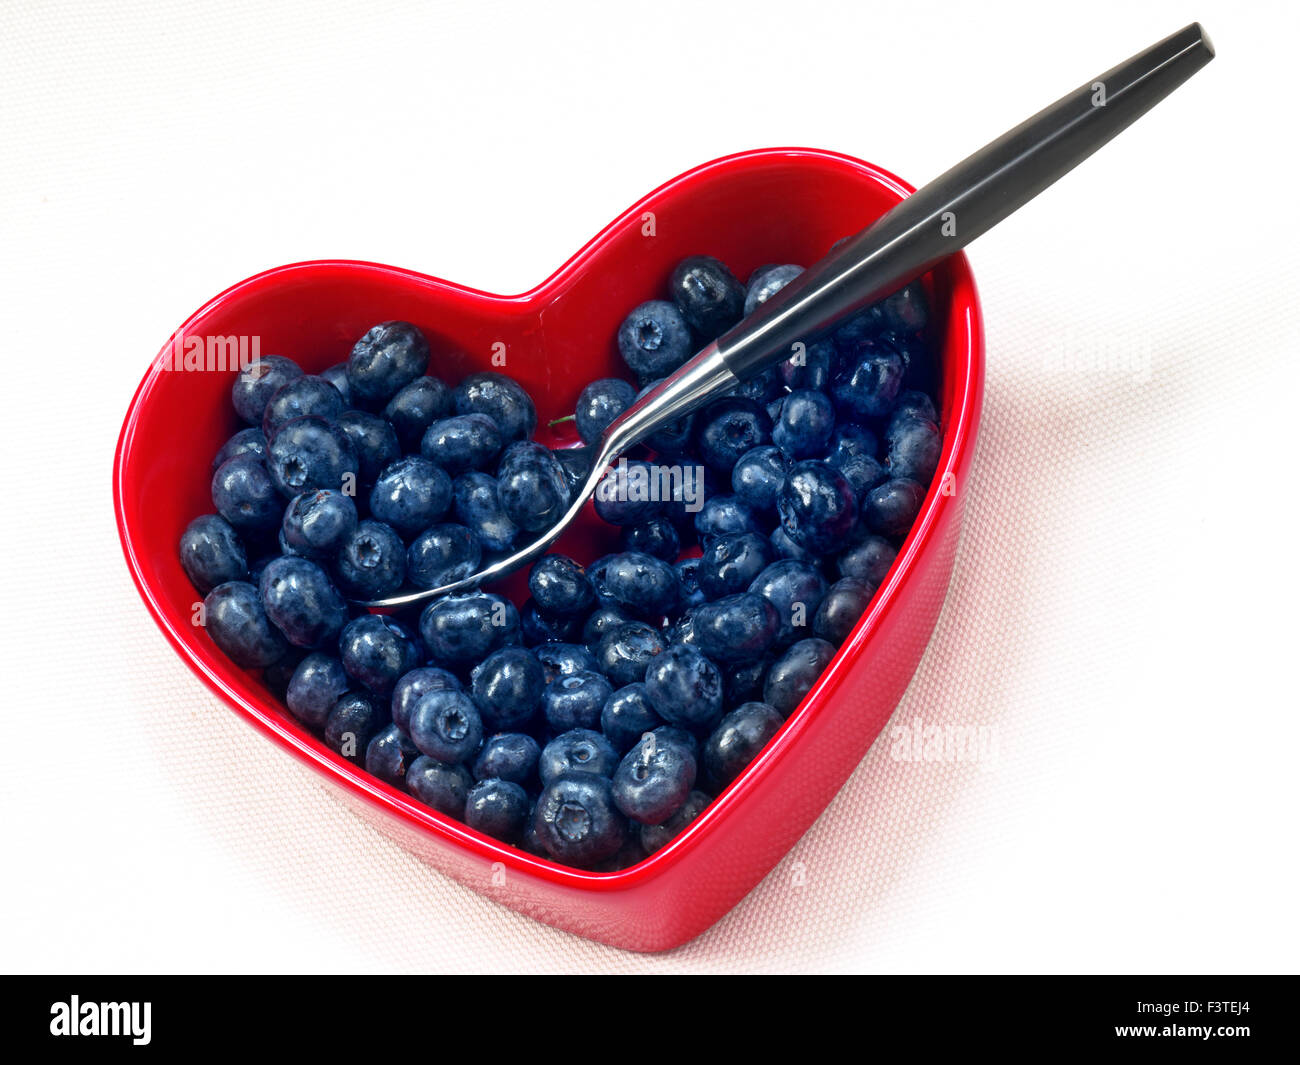 BLUEBERRIES HEART Health food heart concept / Blueberries in a red heart shaped dish with contemporary design spoon on white background Stock Photo